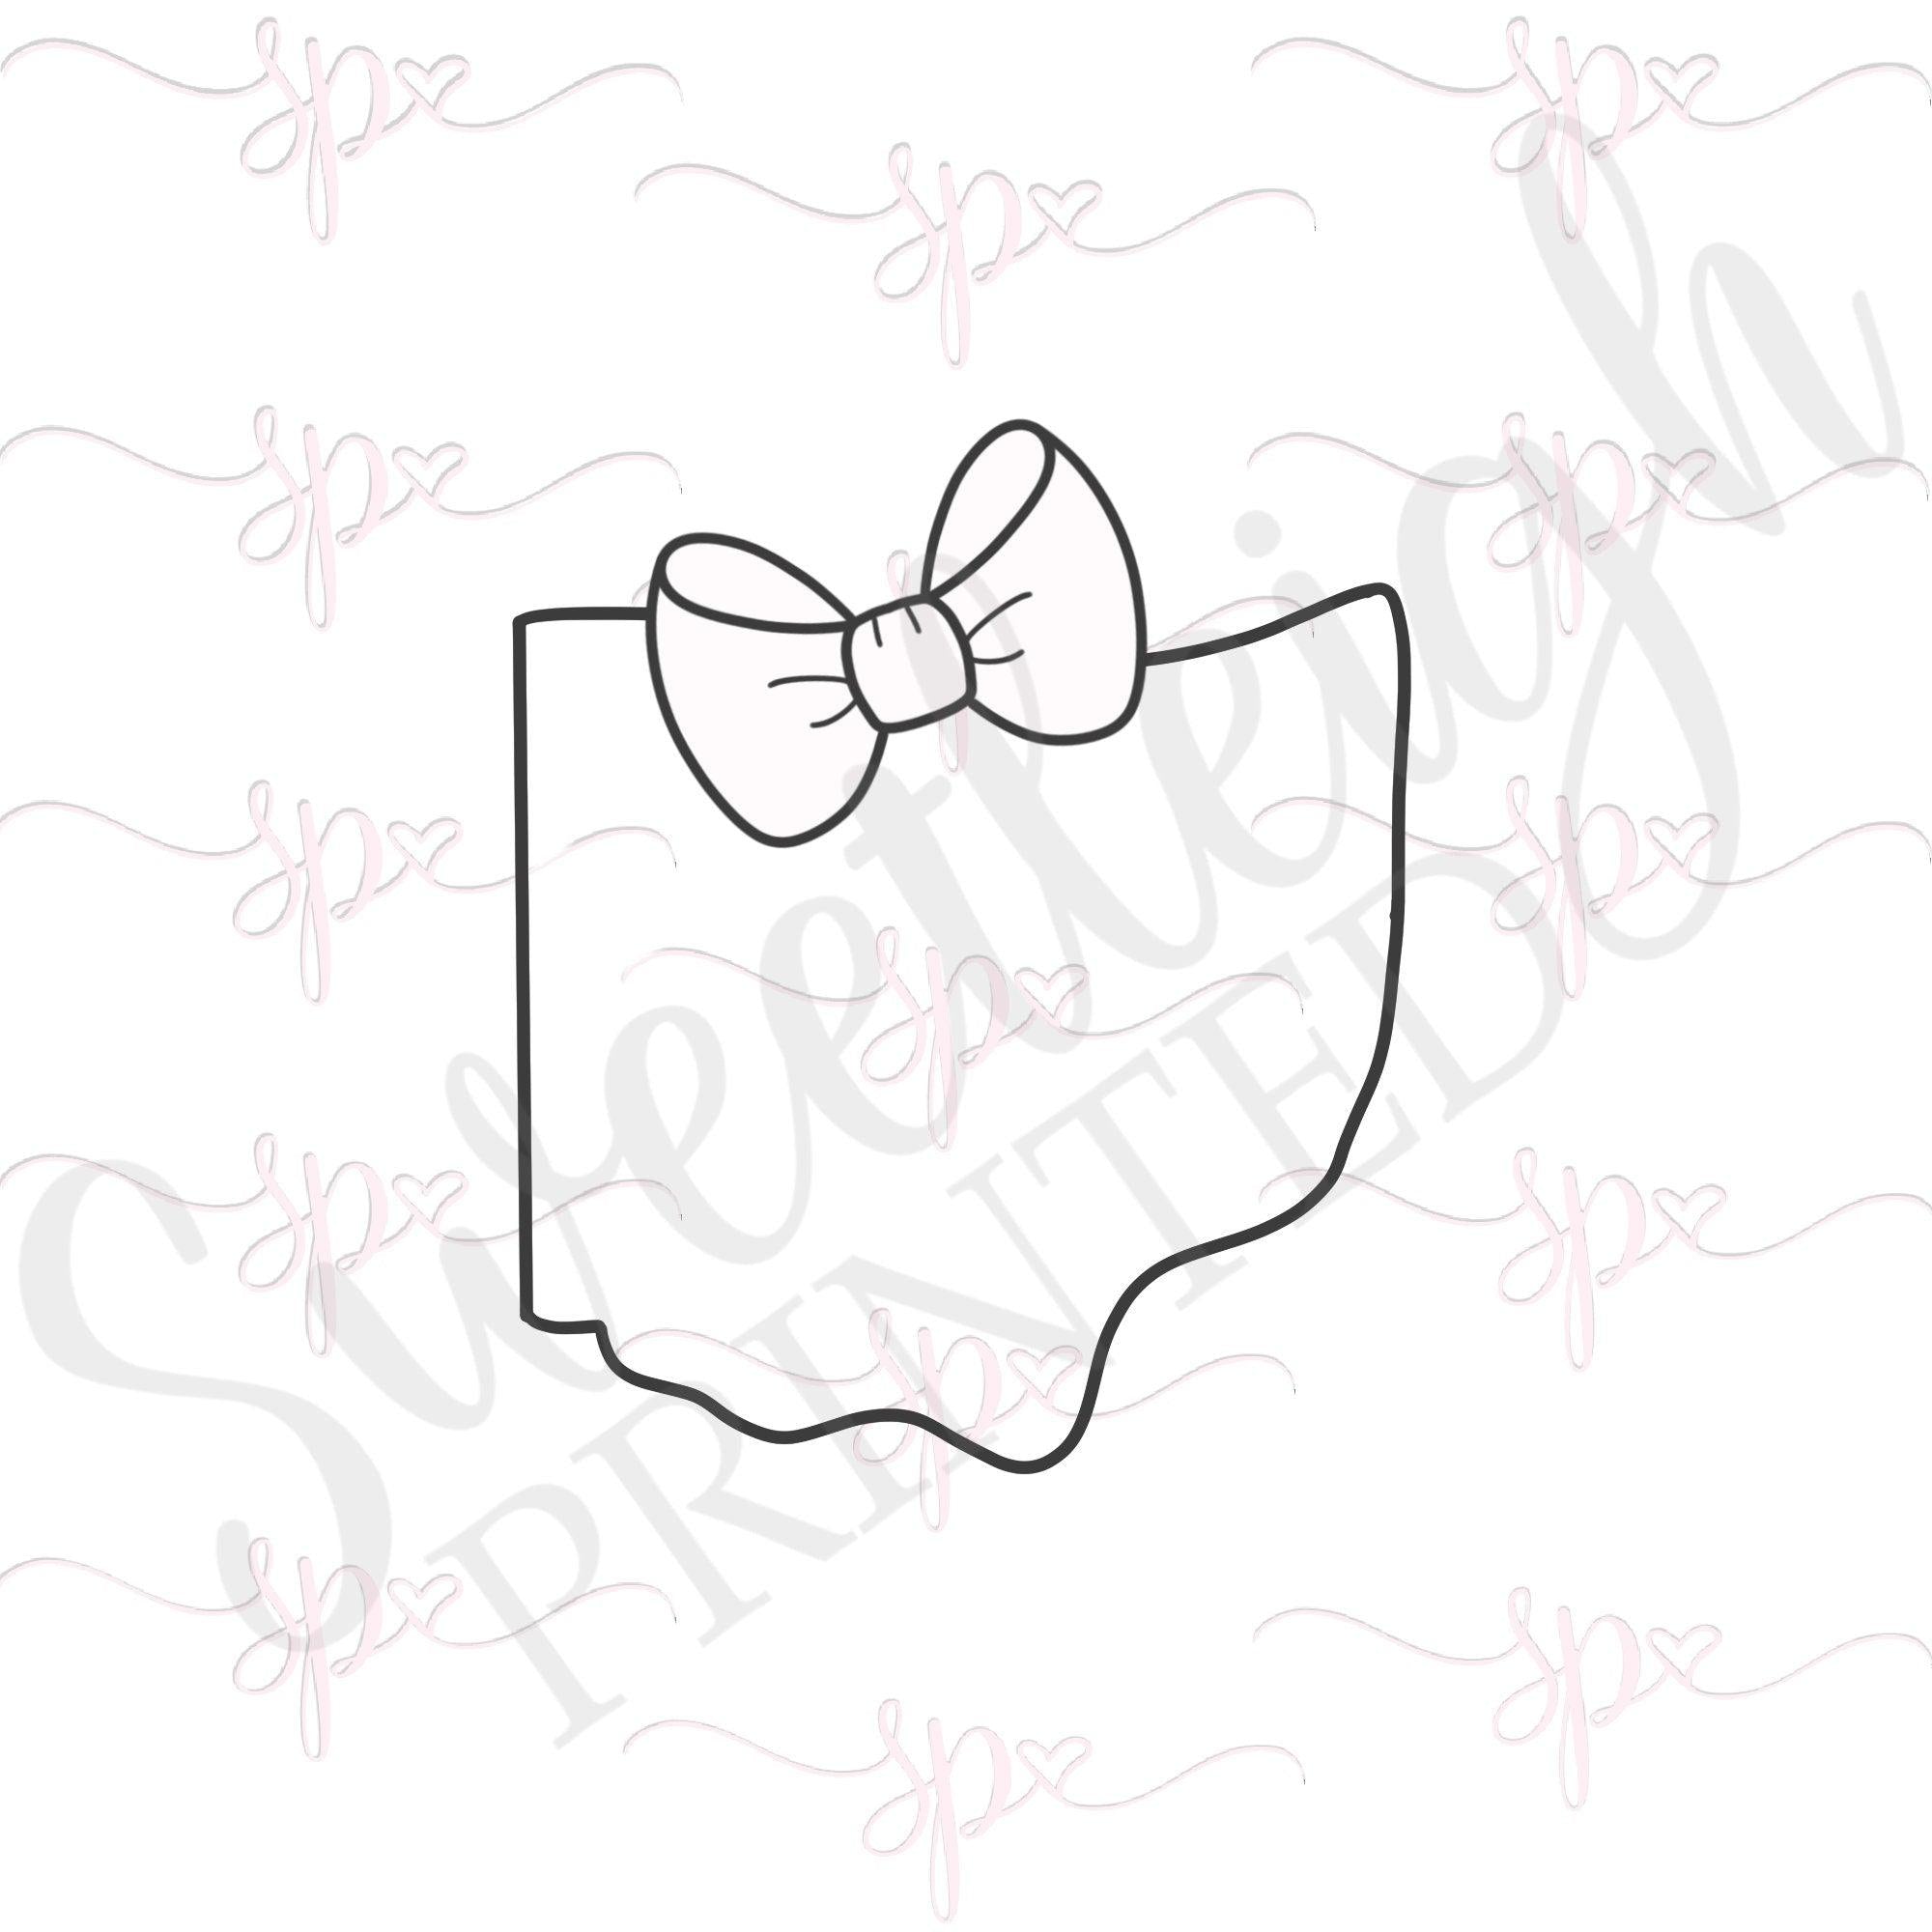 Girly Ohio 2 Cookie Cutter - Sweetleigh 